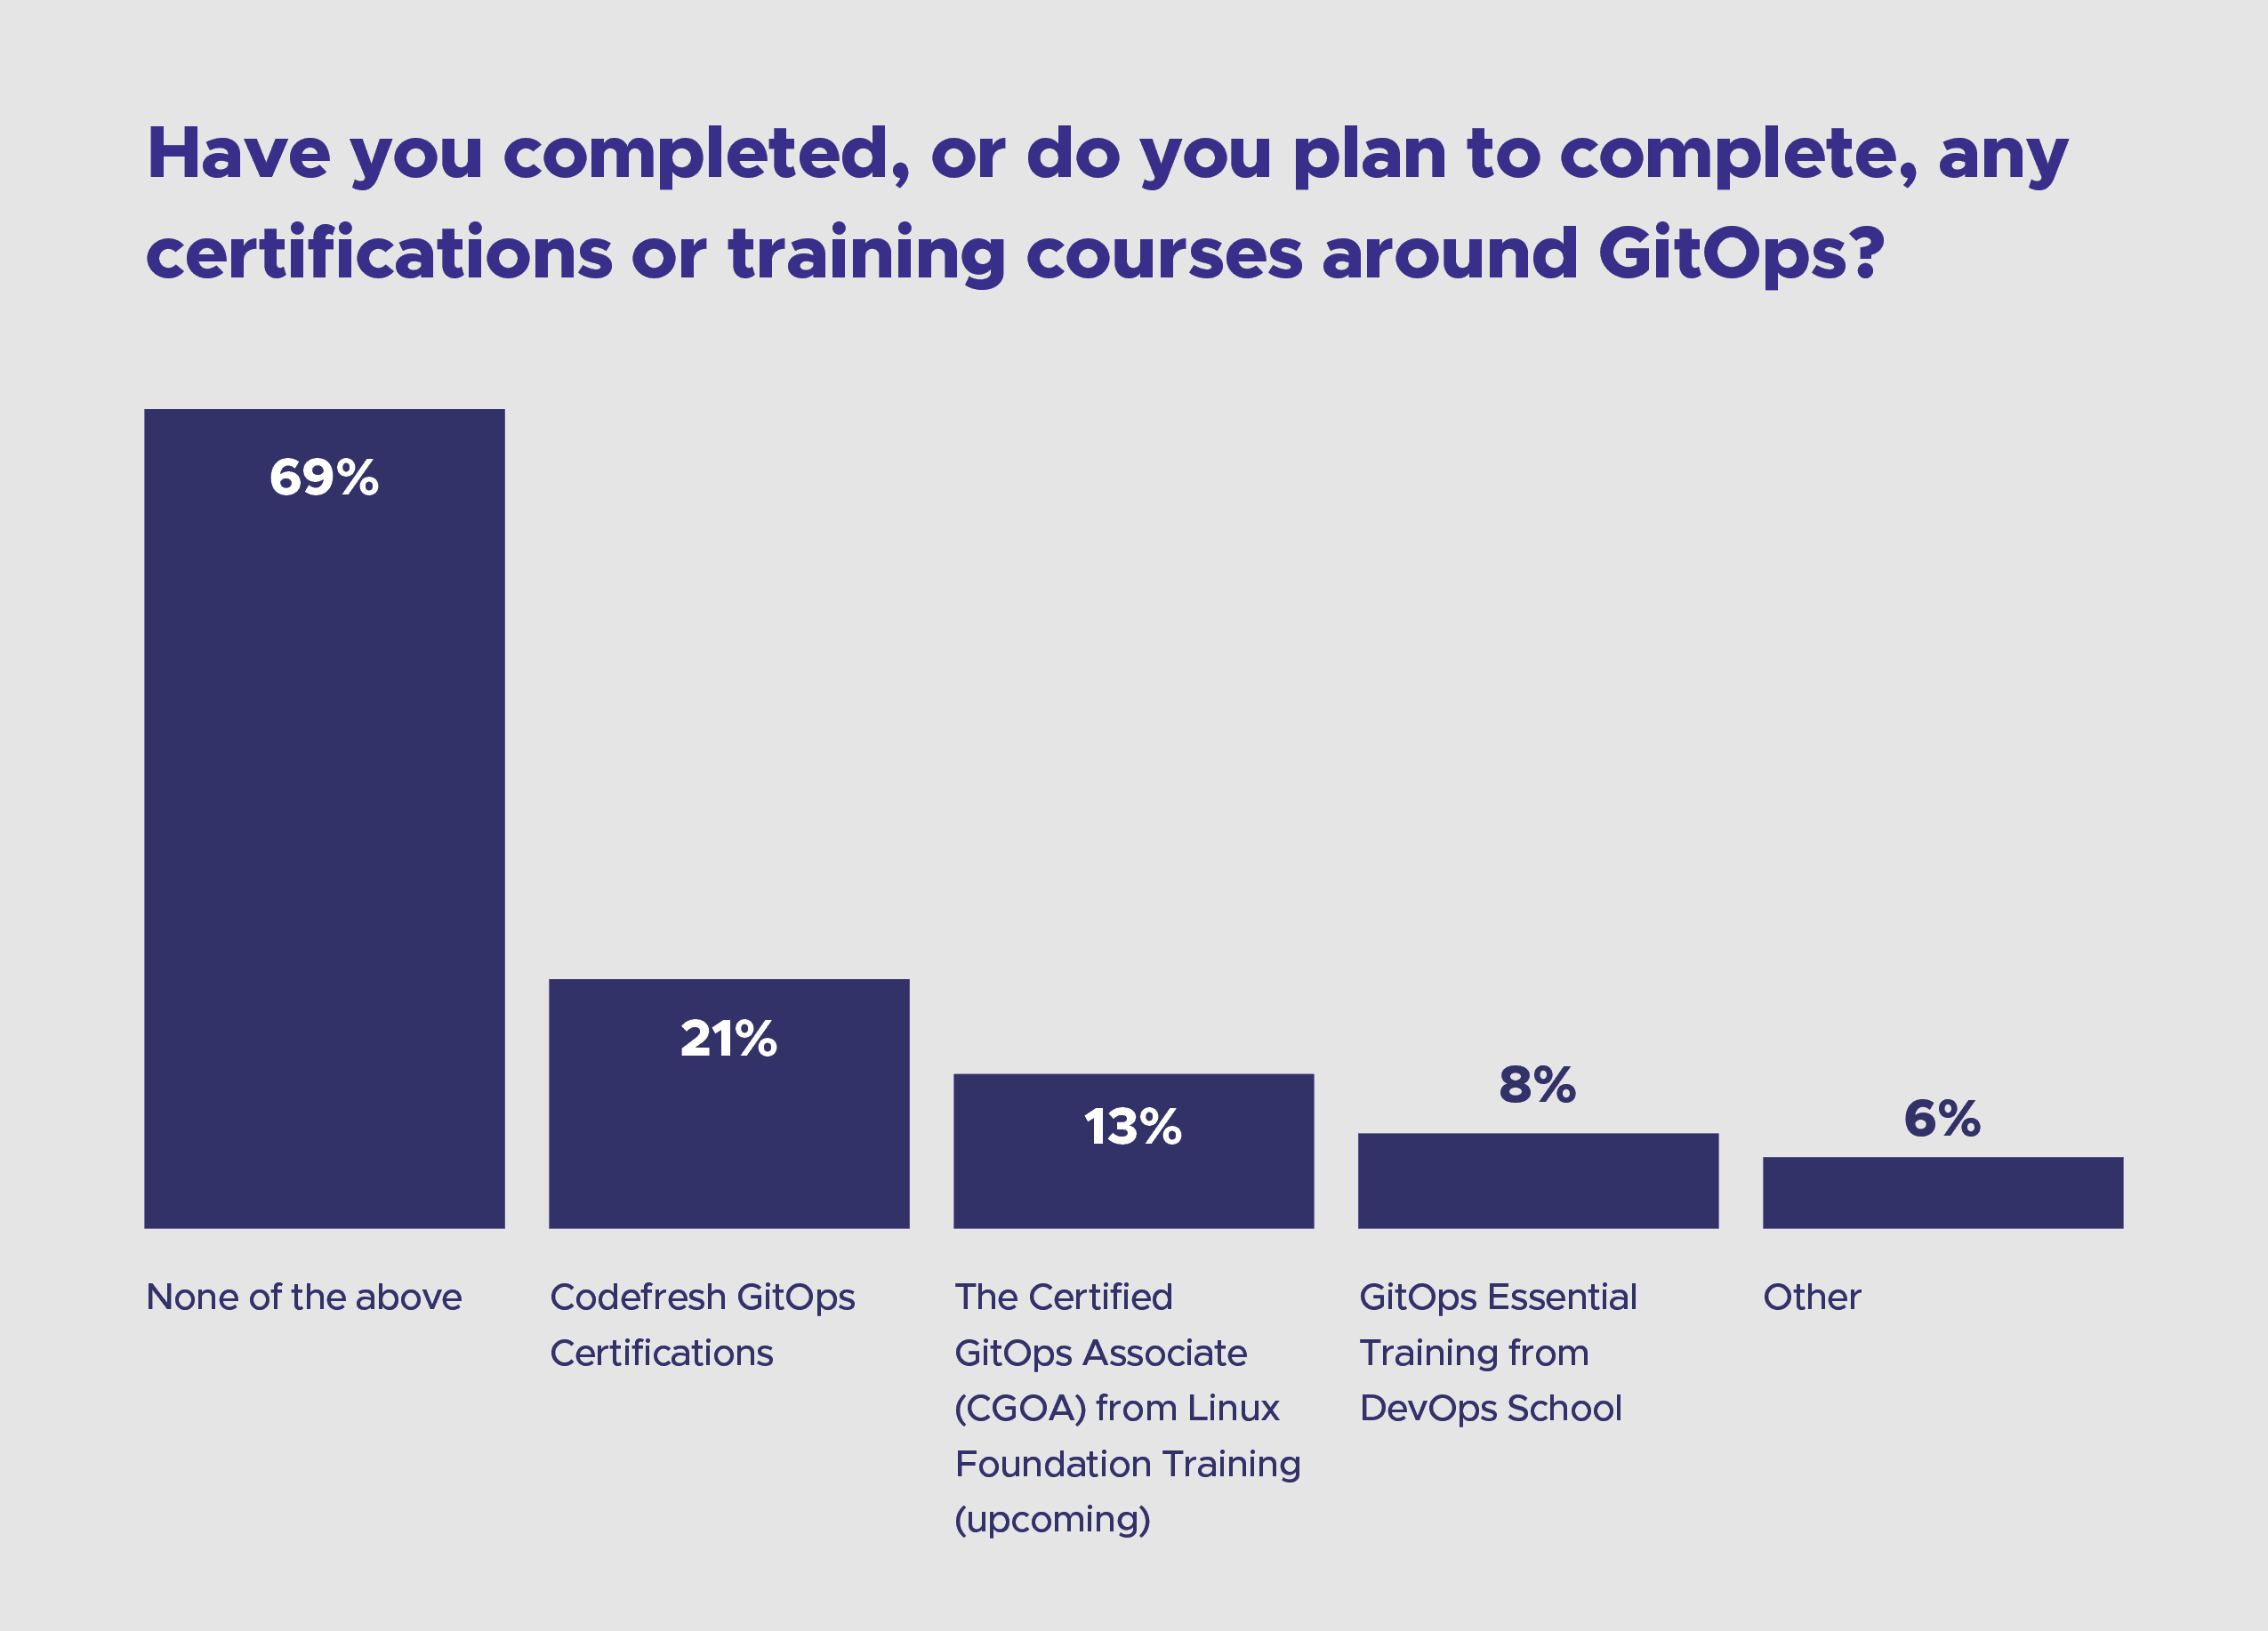 Bar chart showing respondent's respond towards question "Have you completed, or do you plan to complete, any certifications or training courses around GitOps?" 69% chose "none of the above" while 21% chose "Codefresh GitOps Certifications, 13% chose "The Certified GitOps Associate (CGOA) from Linux Foundation Training (upcoming), 8% chose "GitOps Essential Training from DevOps School"